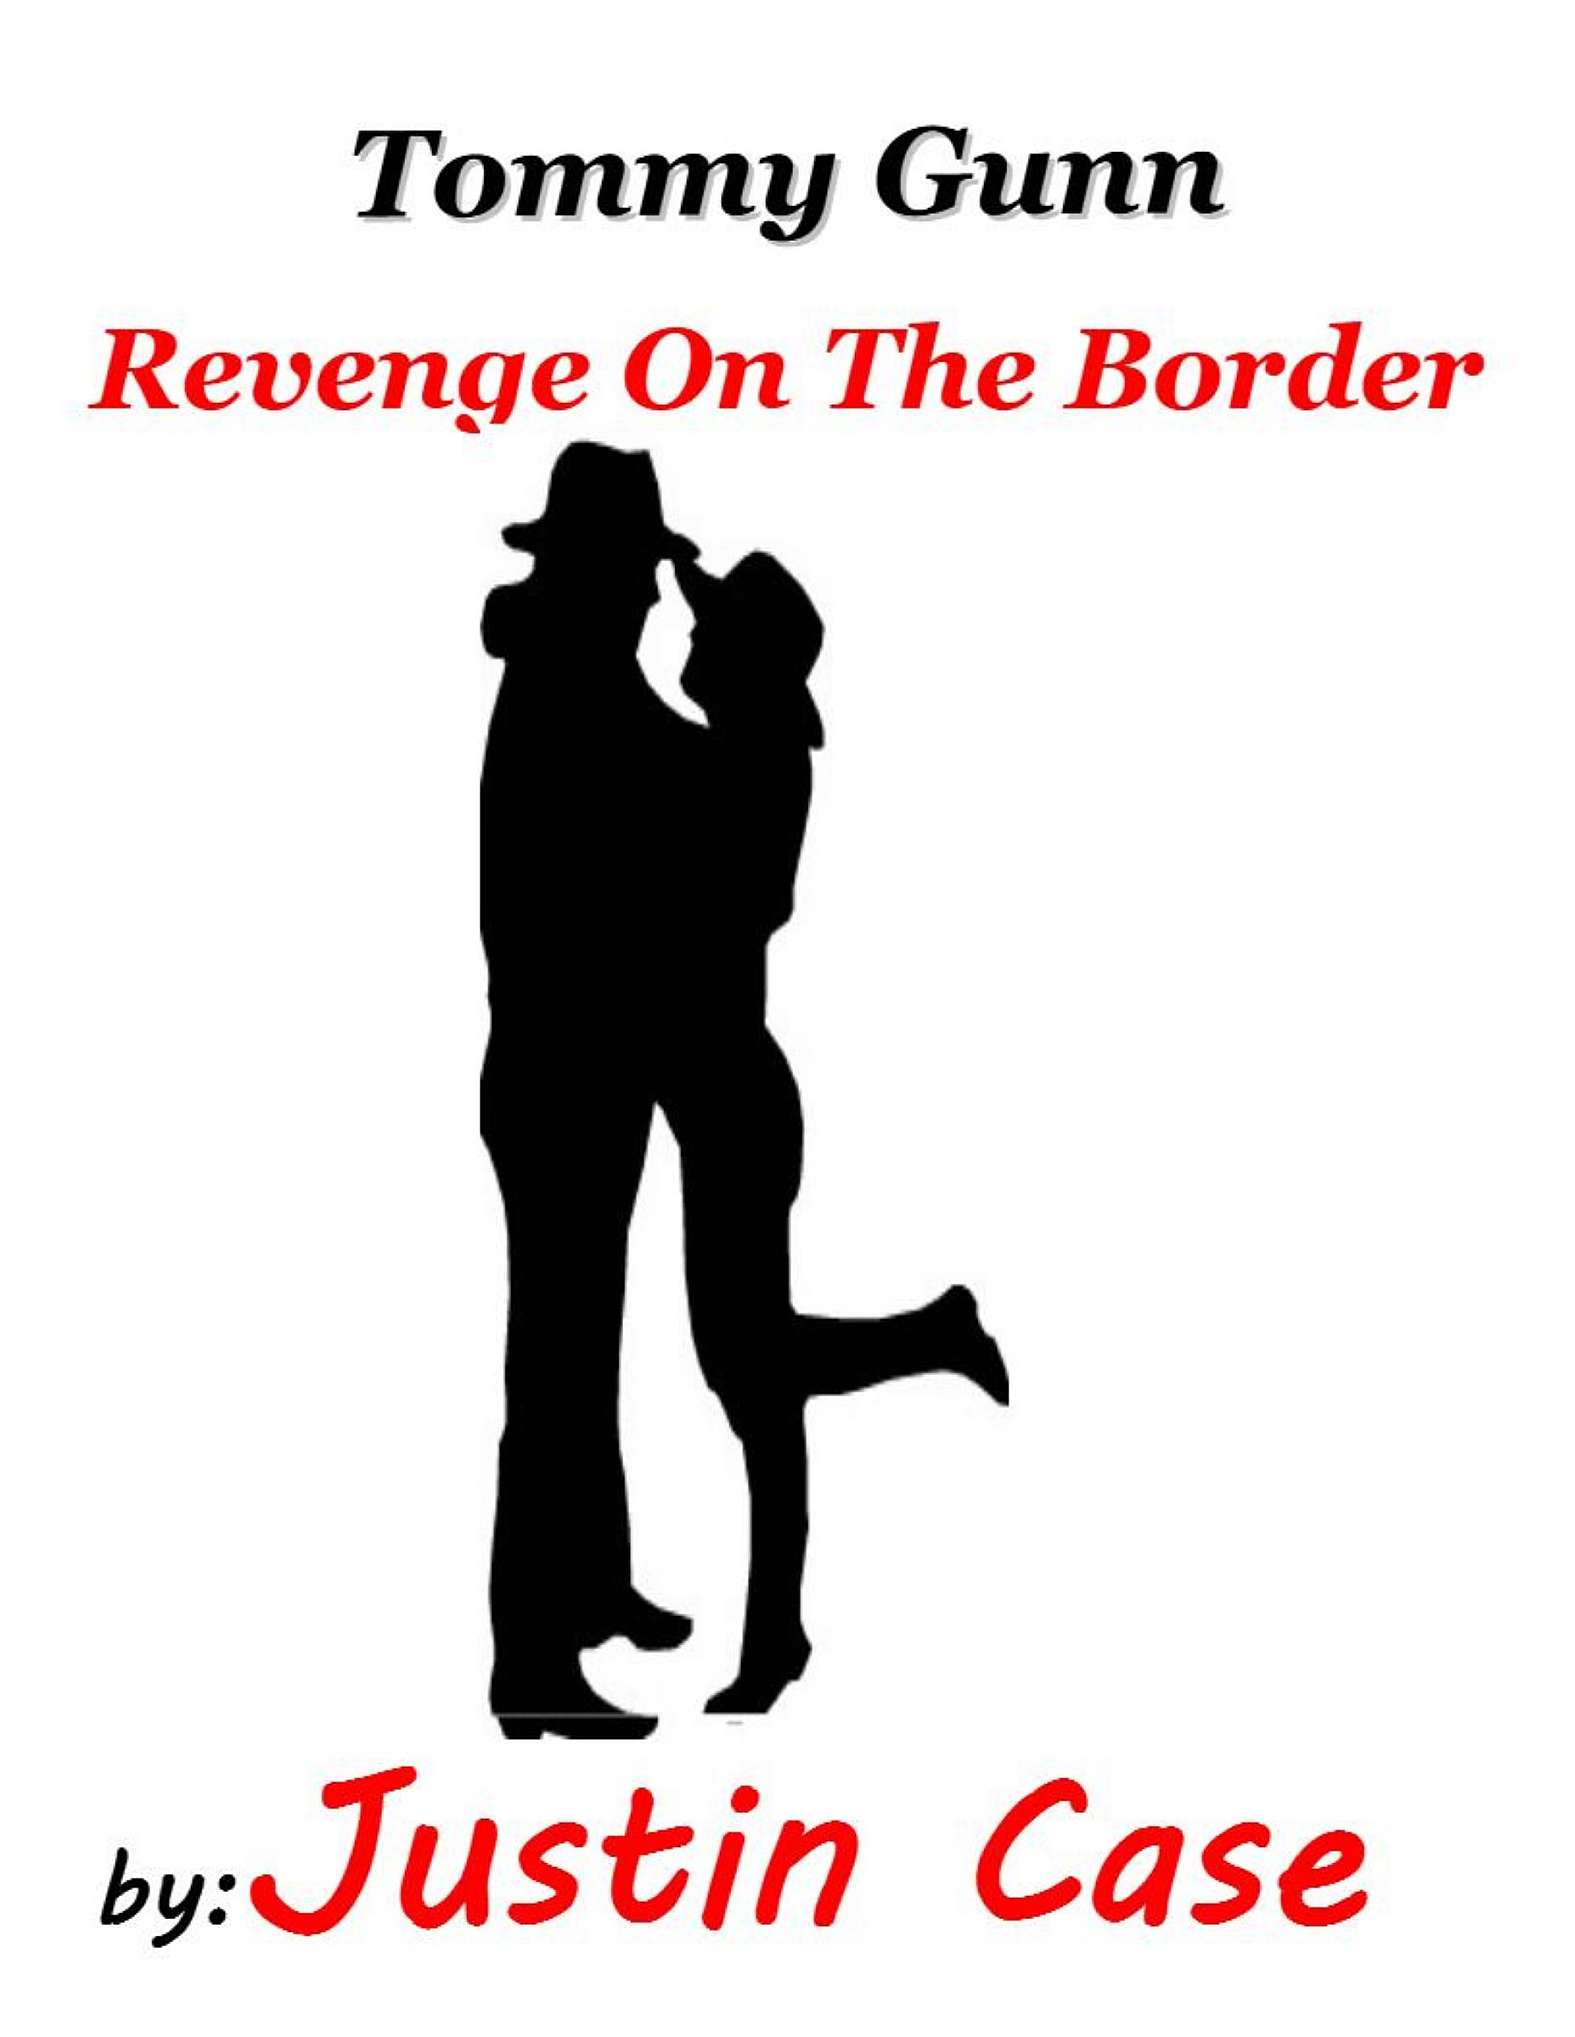 Book Tommy Gunn Book One Revenge On The Border By Justin Case